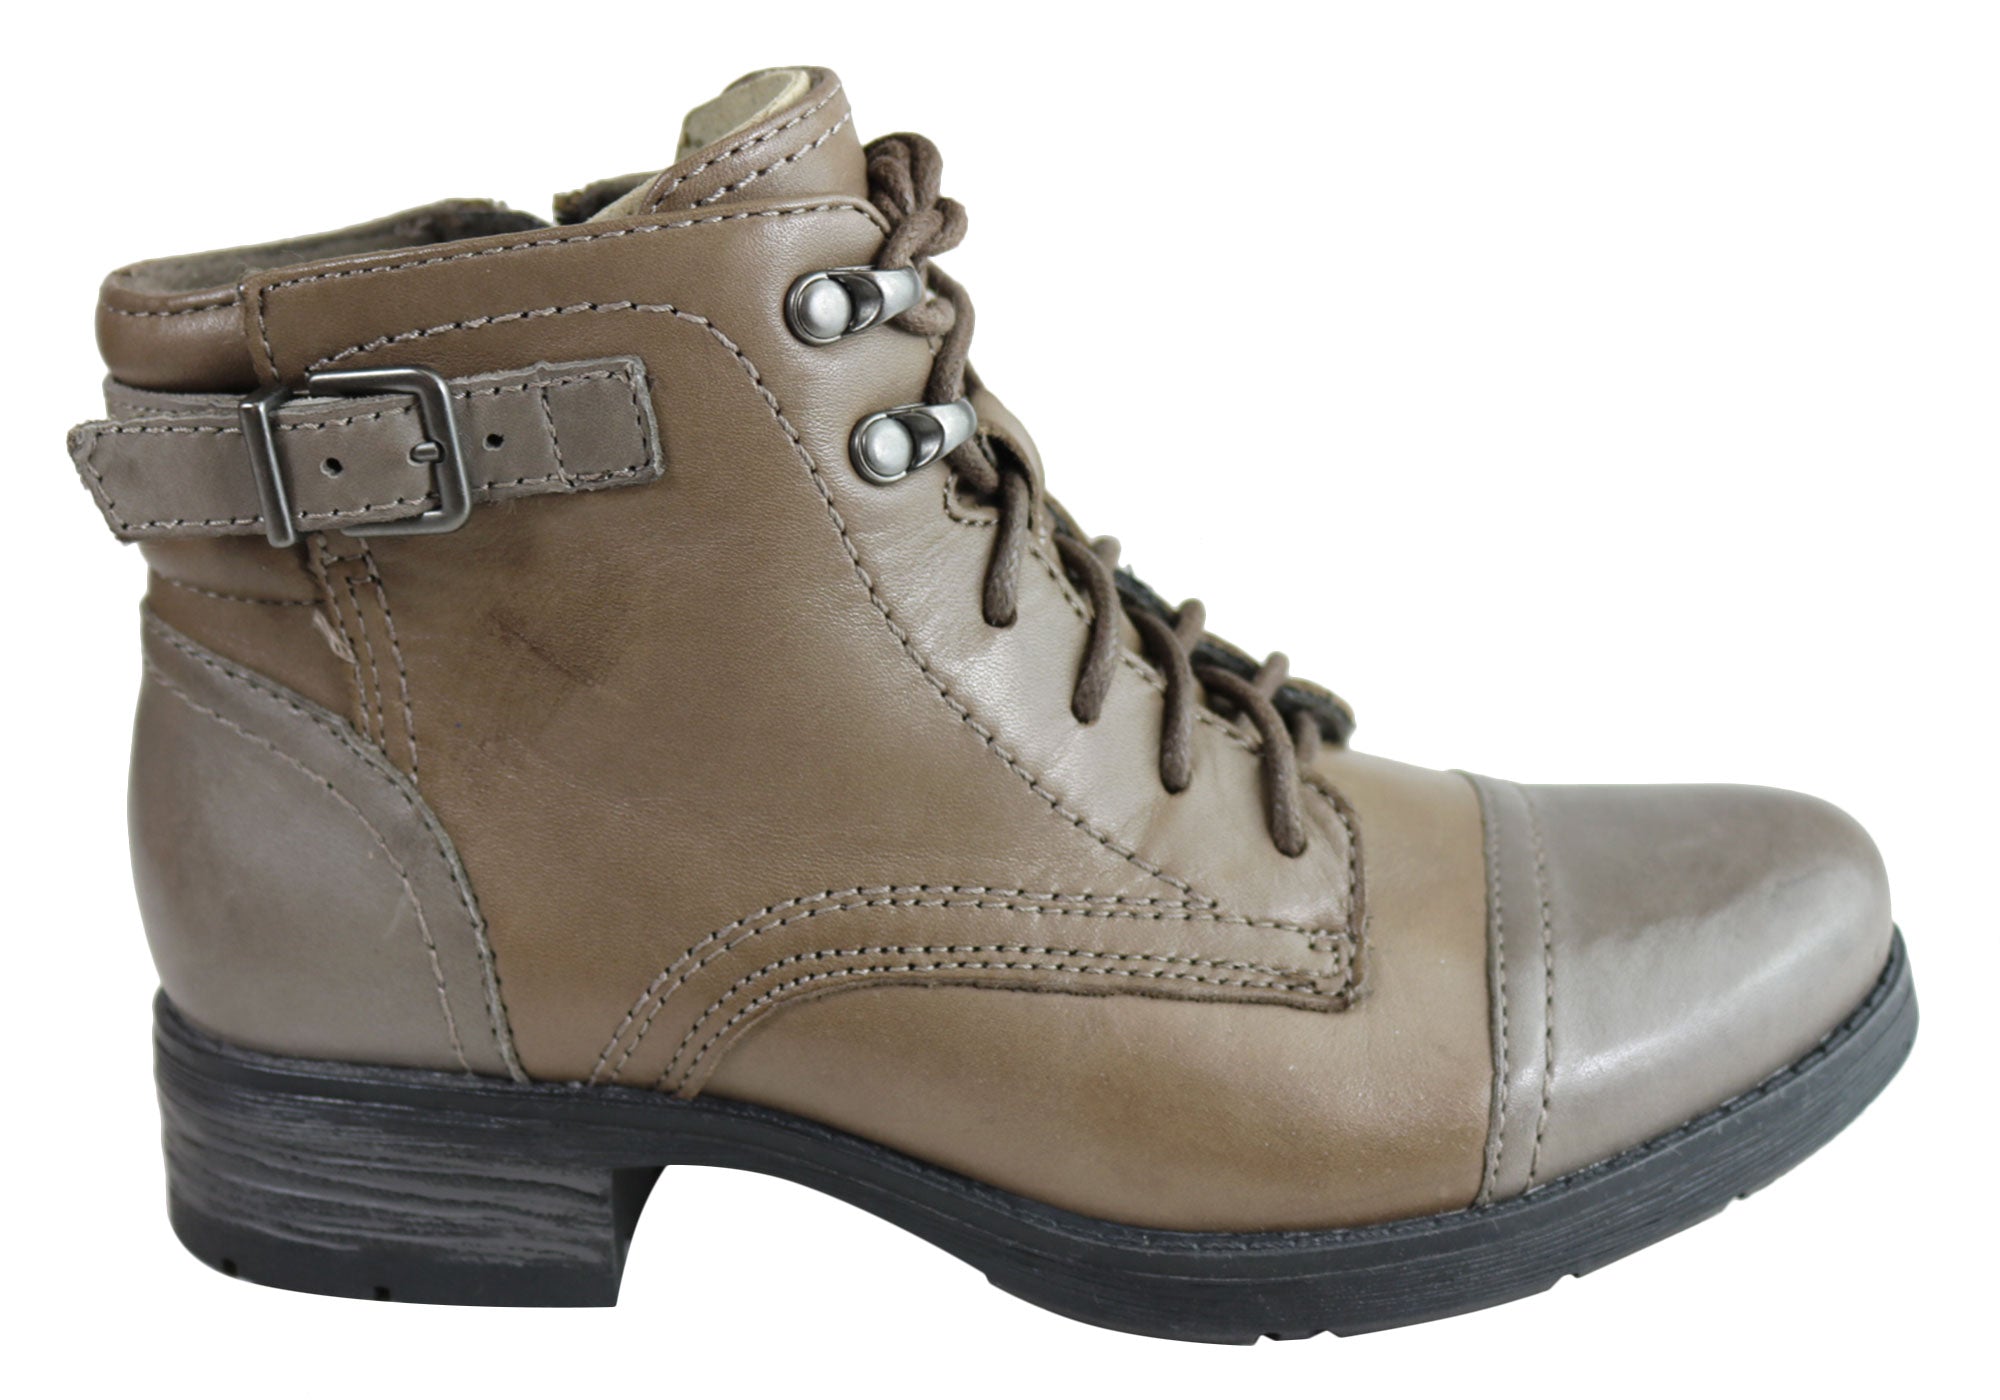 women's work boots with arch support